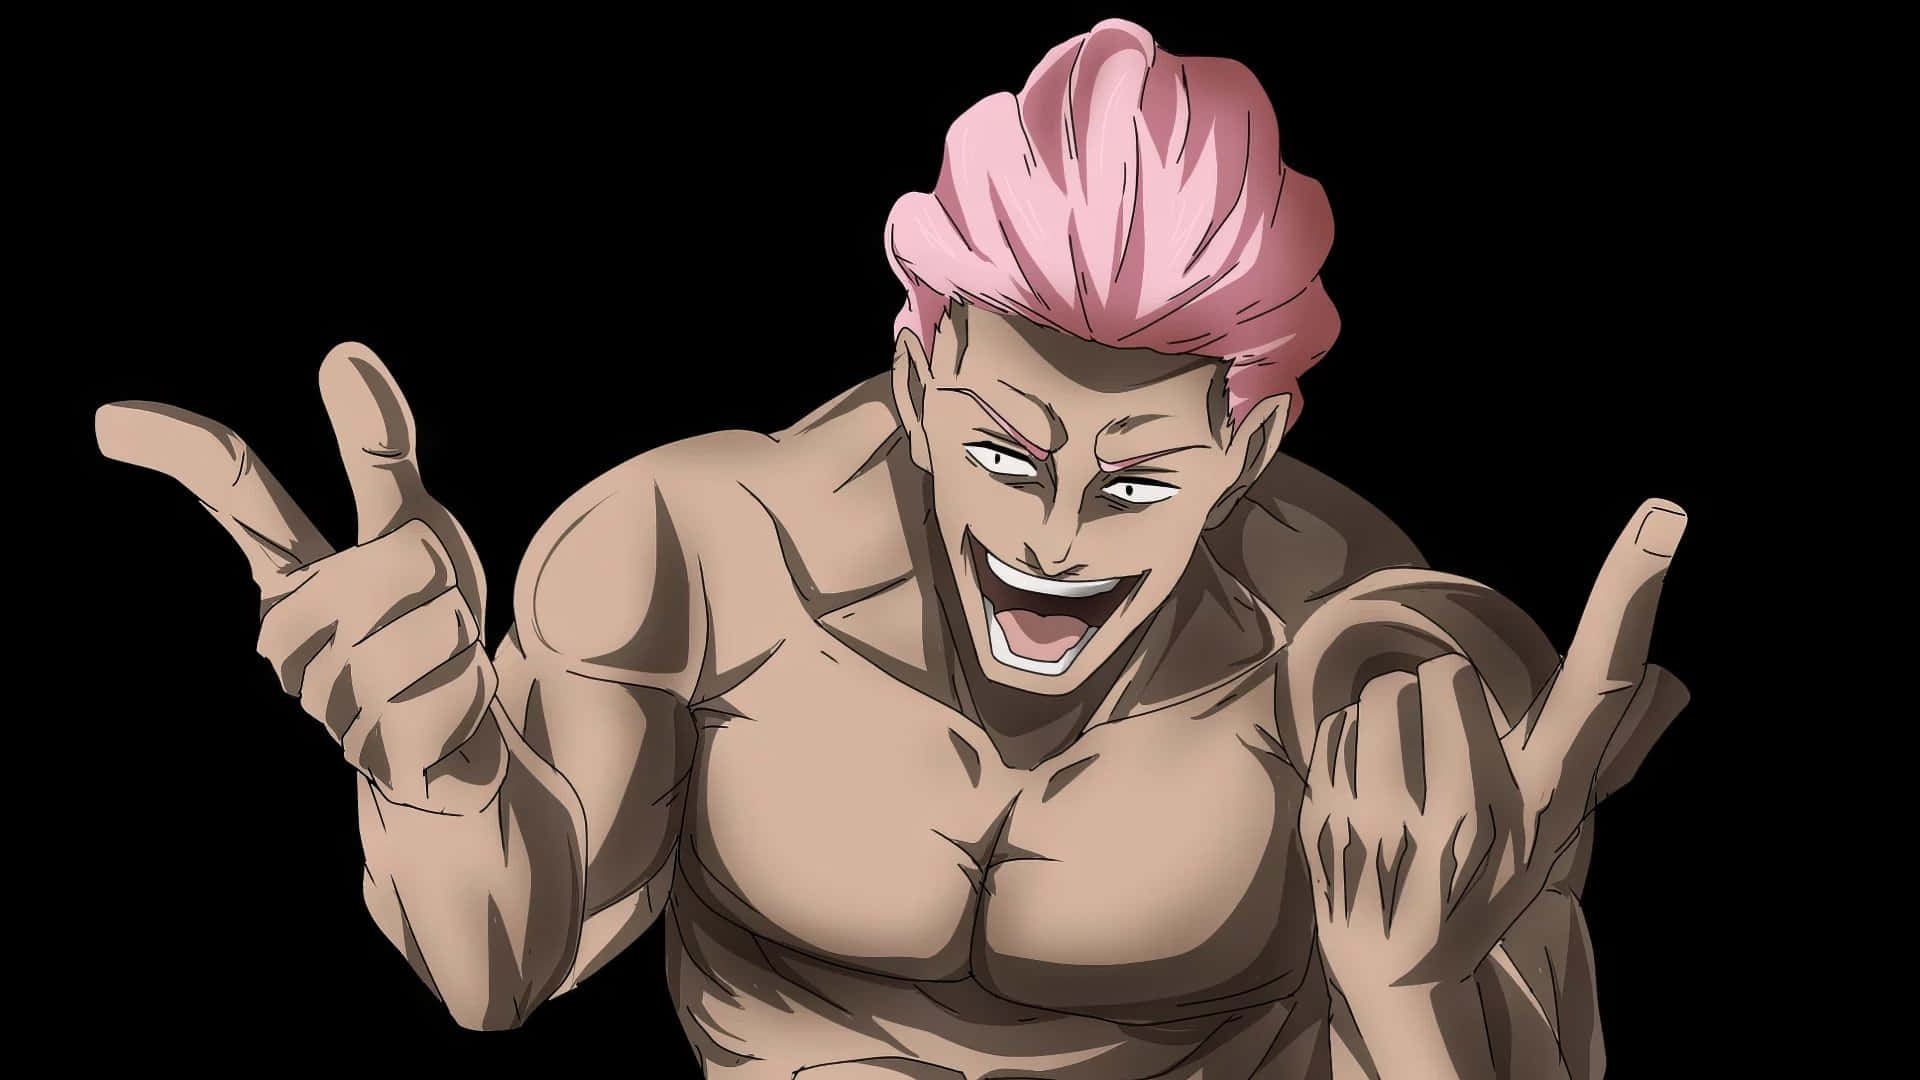 Animated Pink Haired Character Gesture Wallpaper